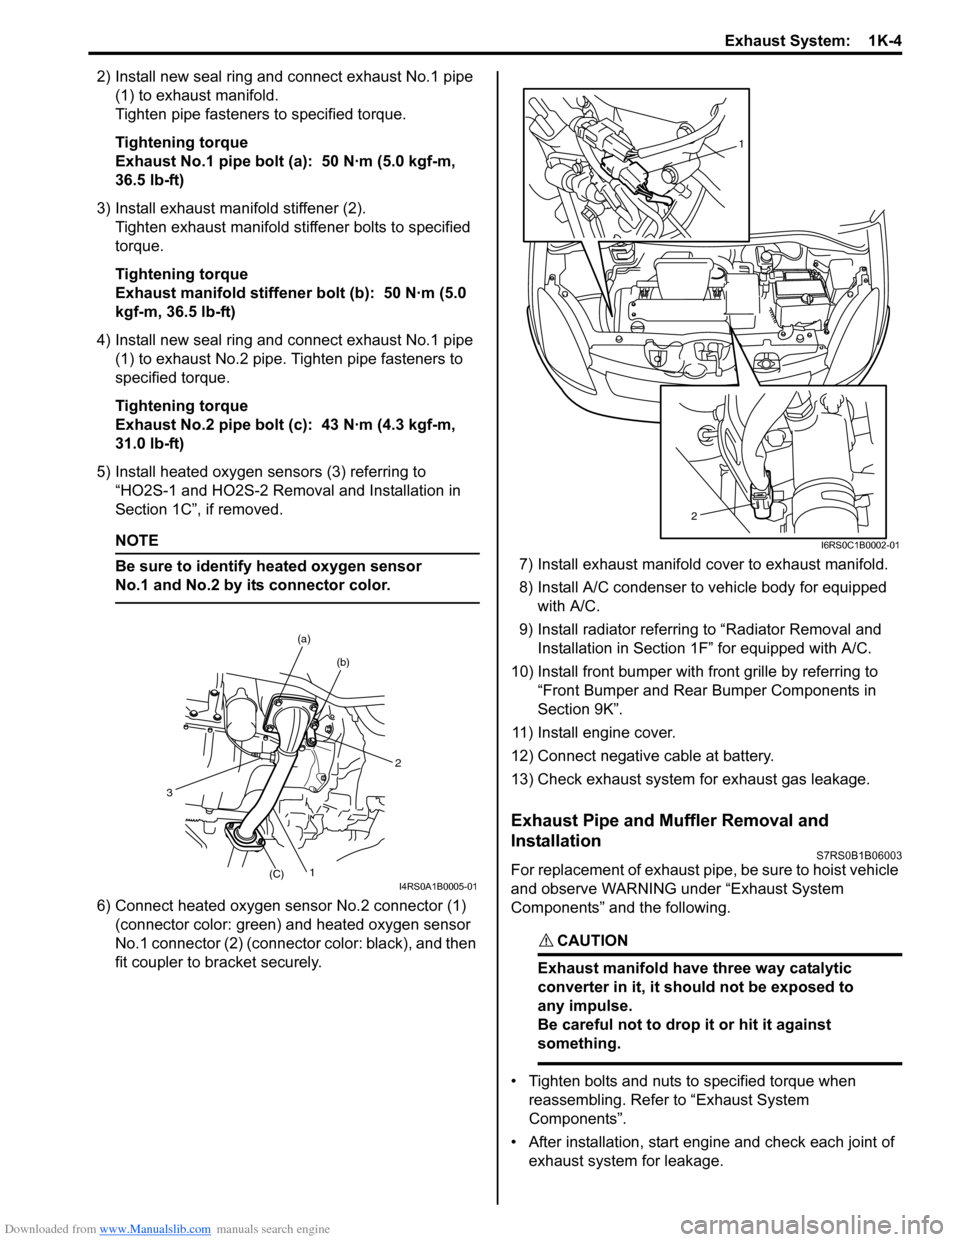 SUZUKI SWIFT 2008 2.G Service Owners Manual Downloaded from www.Manualslib.com manuals search engine Exhaust System:  1K-4
2) Install new seal ring and connect exhaust No.1 pipe (1) to exhaust manifold.
Tighten pipe fasteners to specified torqu